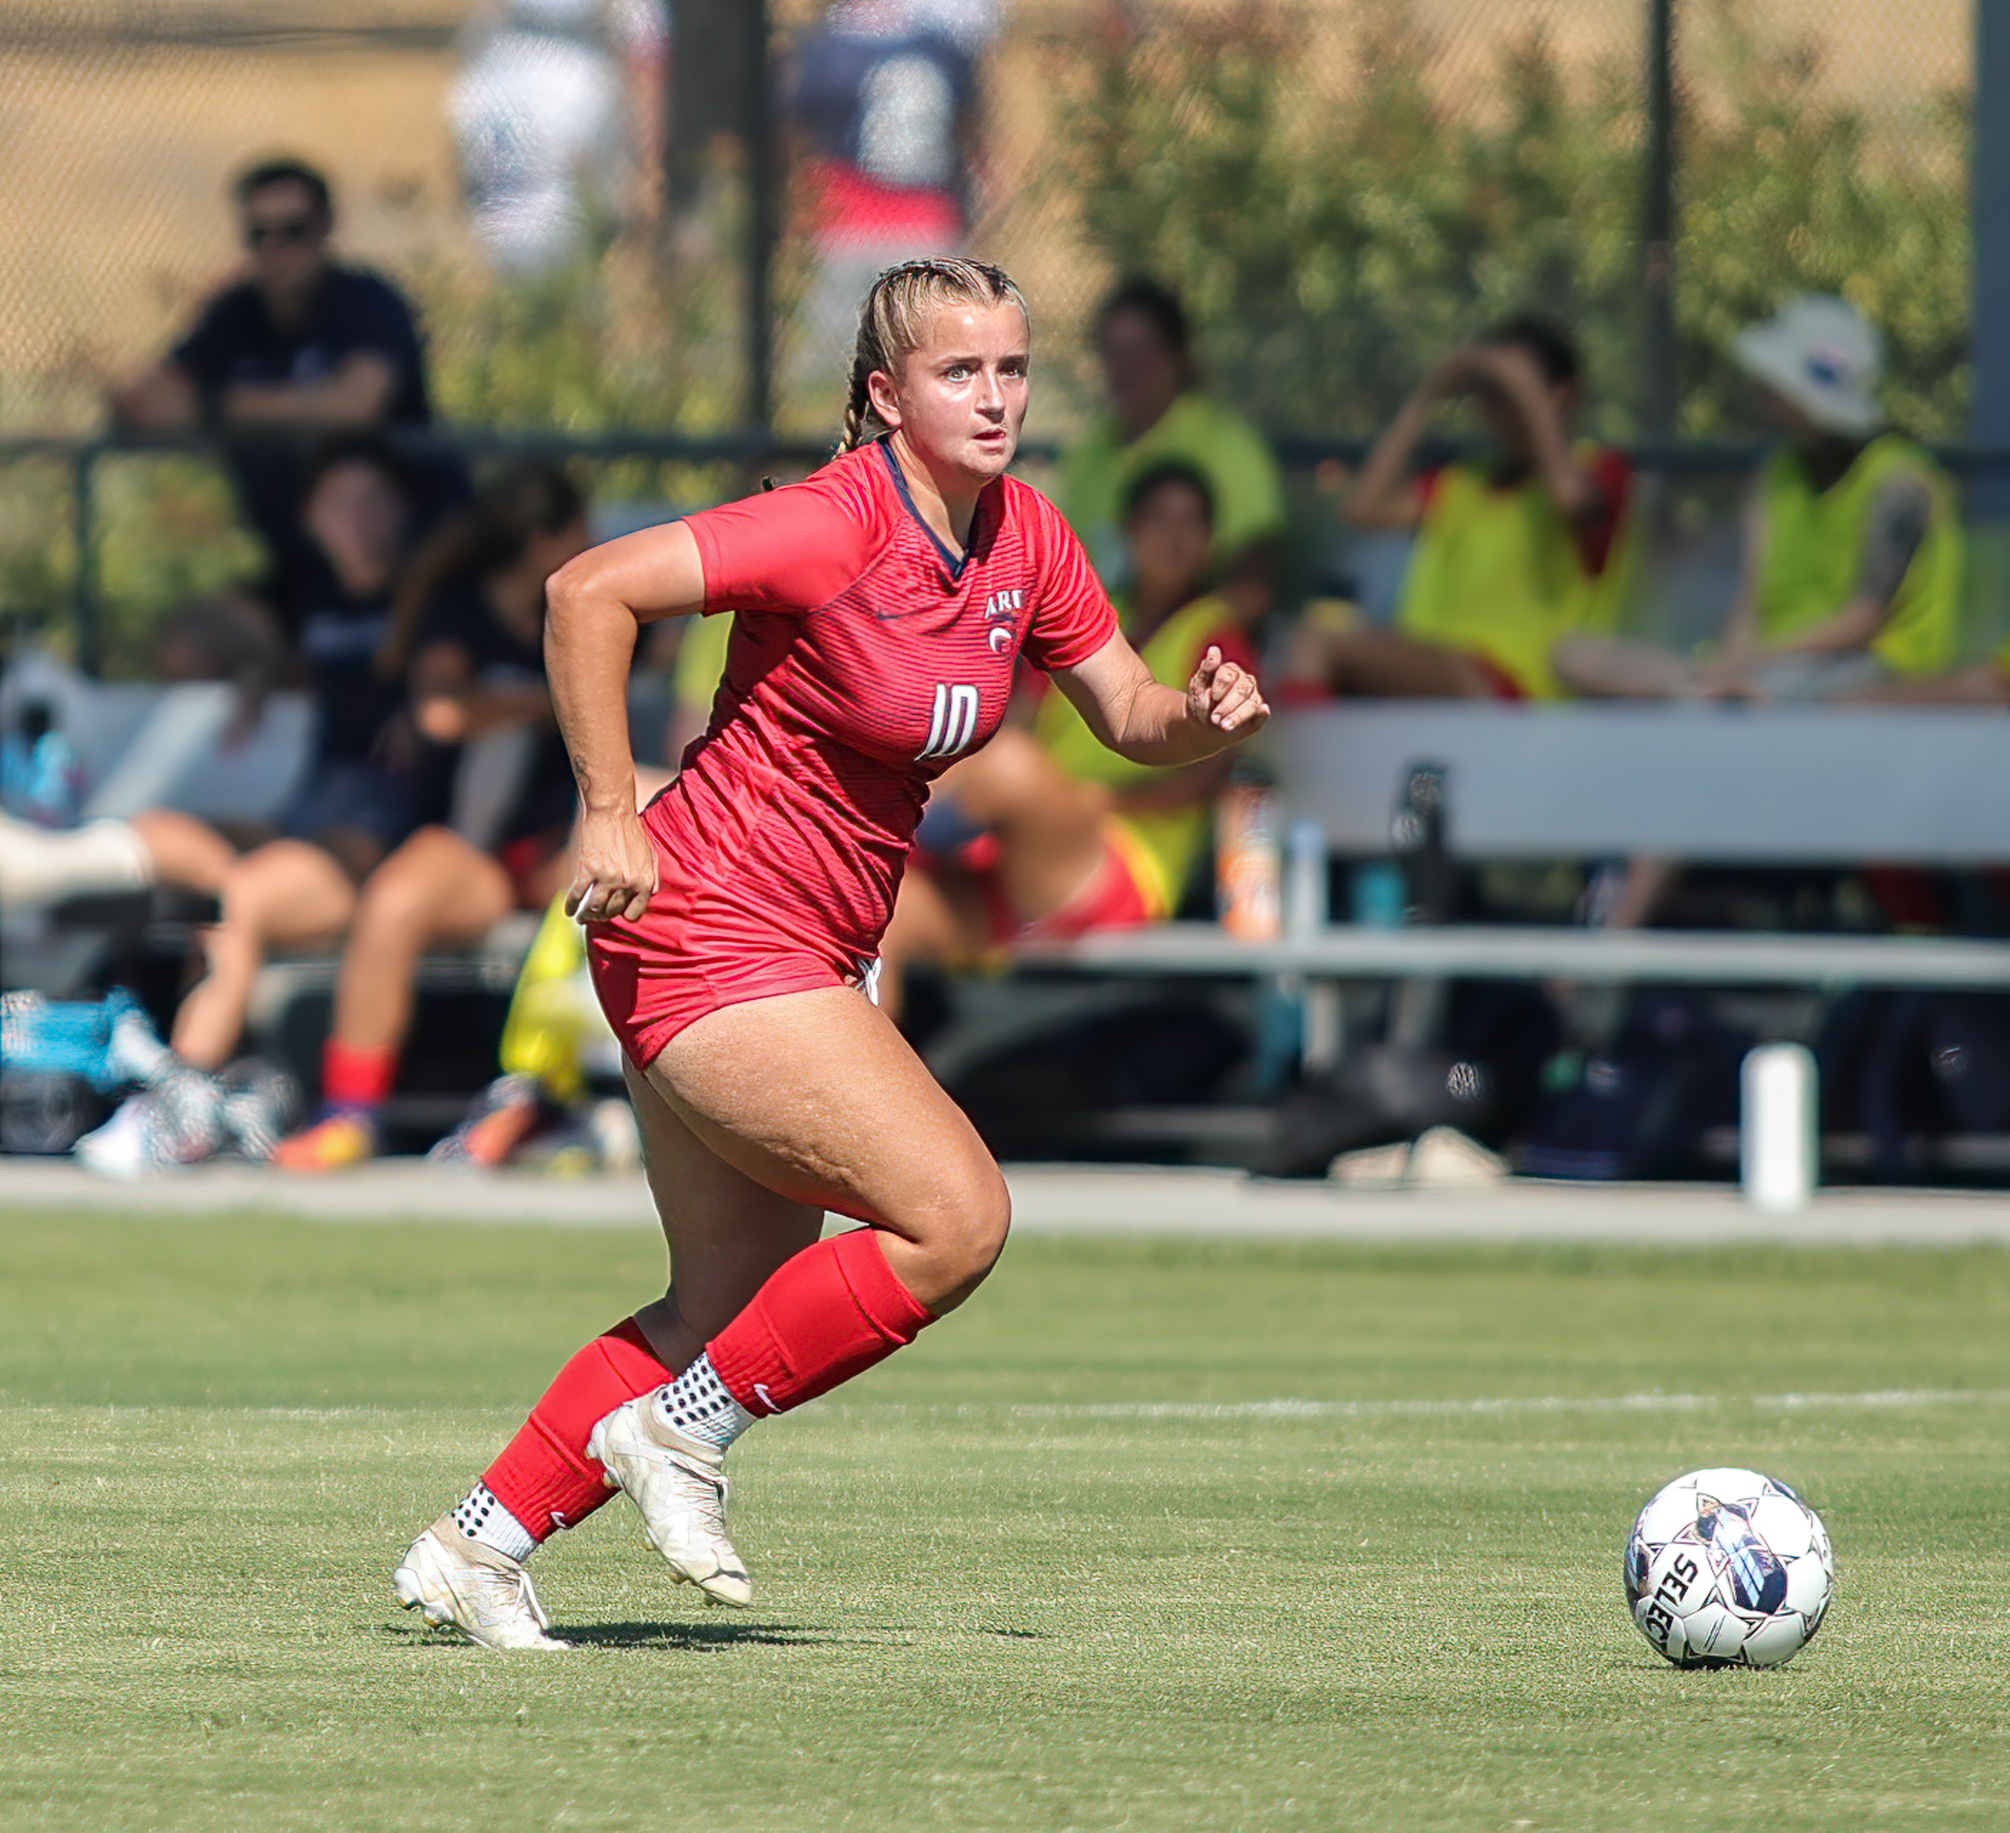 Late Goal Results in Women's Soccer Loss to Modesto Junior College